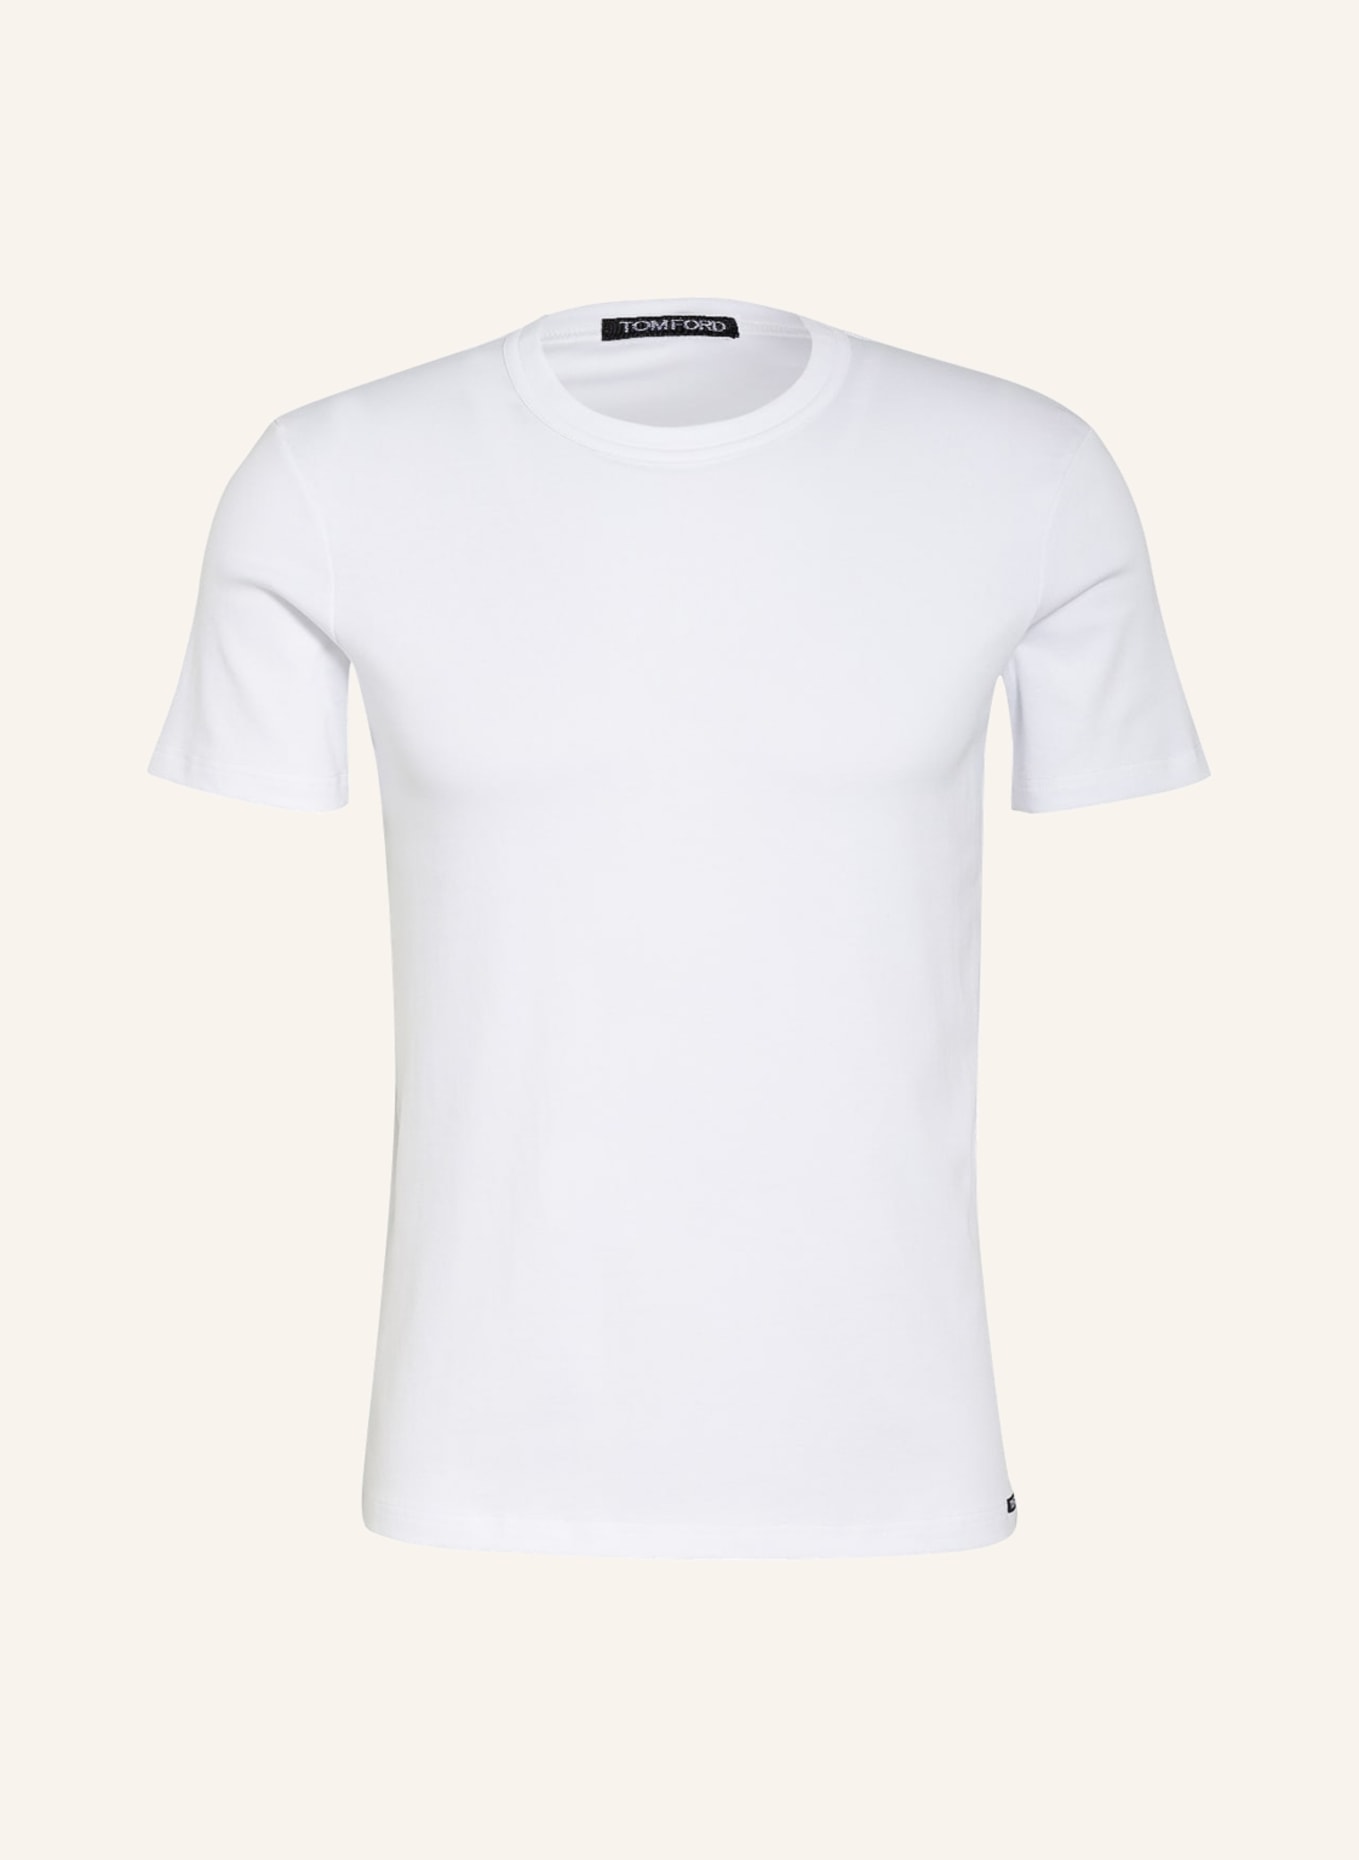 TOM FORD T-shirt, Color: WHITE (Image 1)